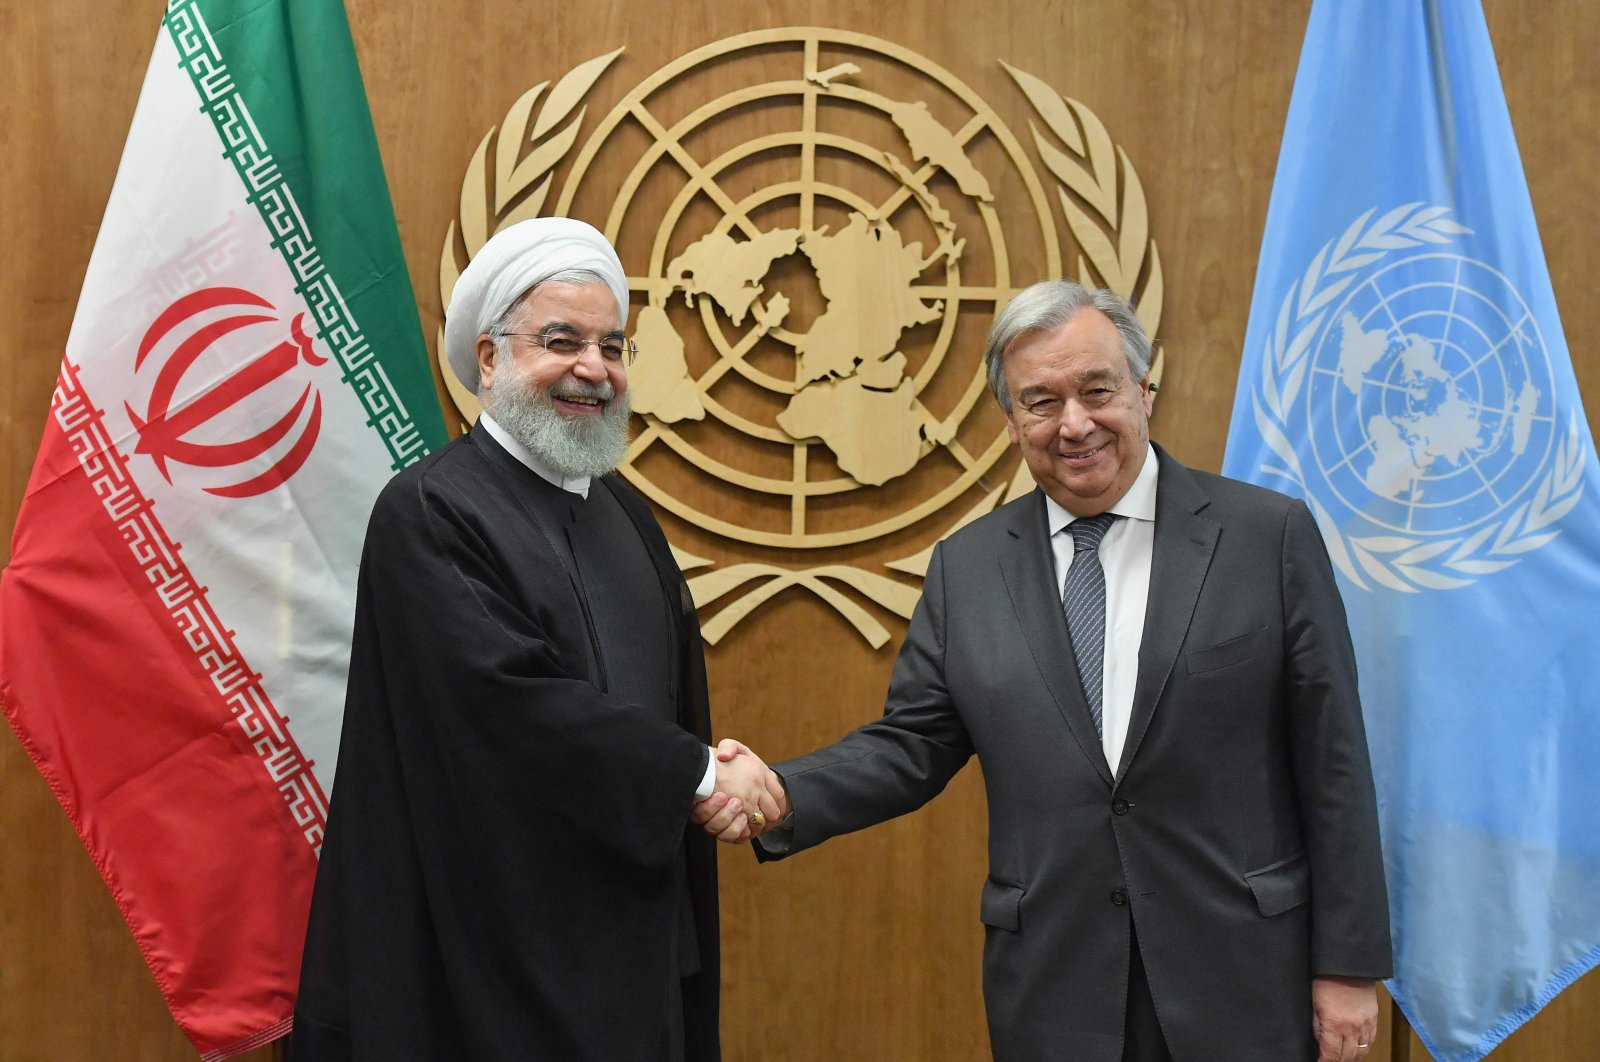 President of Iran Hassan Rouhani meets with United Nations Secretary-General Antonio Guterres at the U.N., New York, the U.S., Sept. 25, 2019. (AFP File Photo)